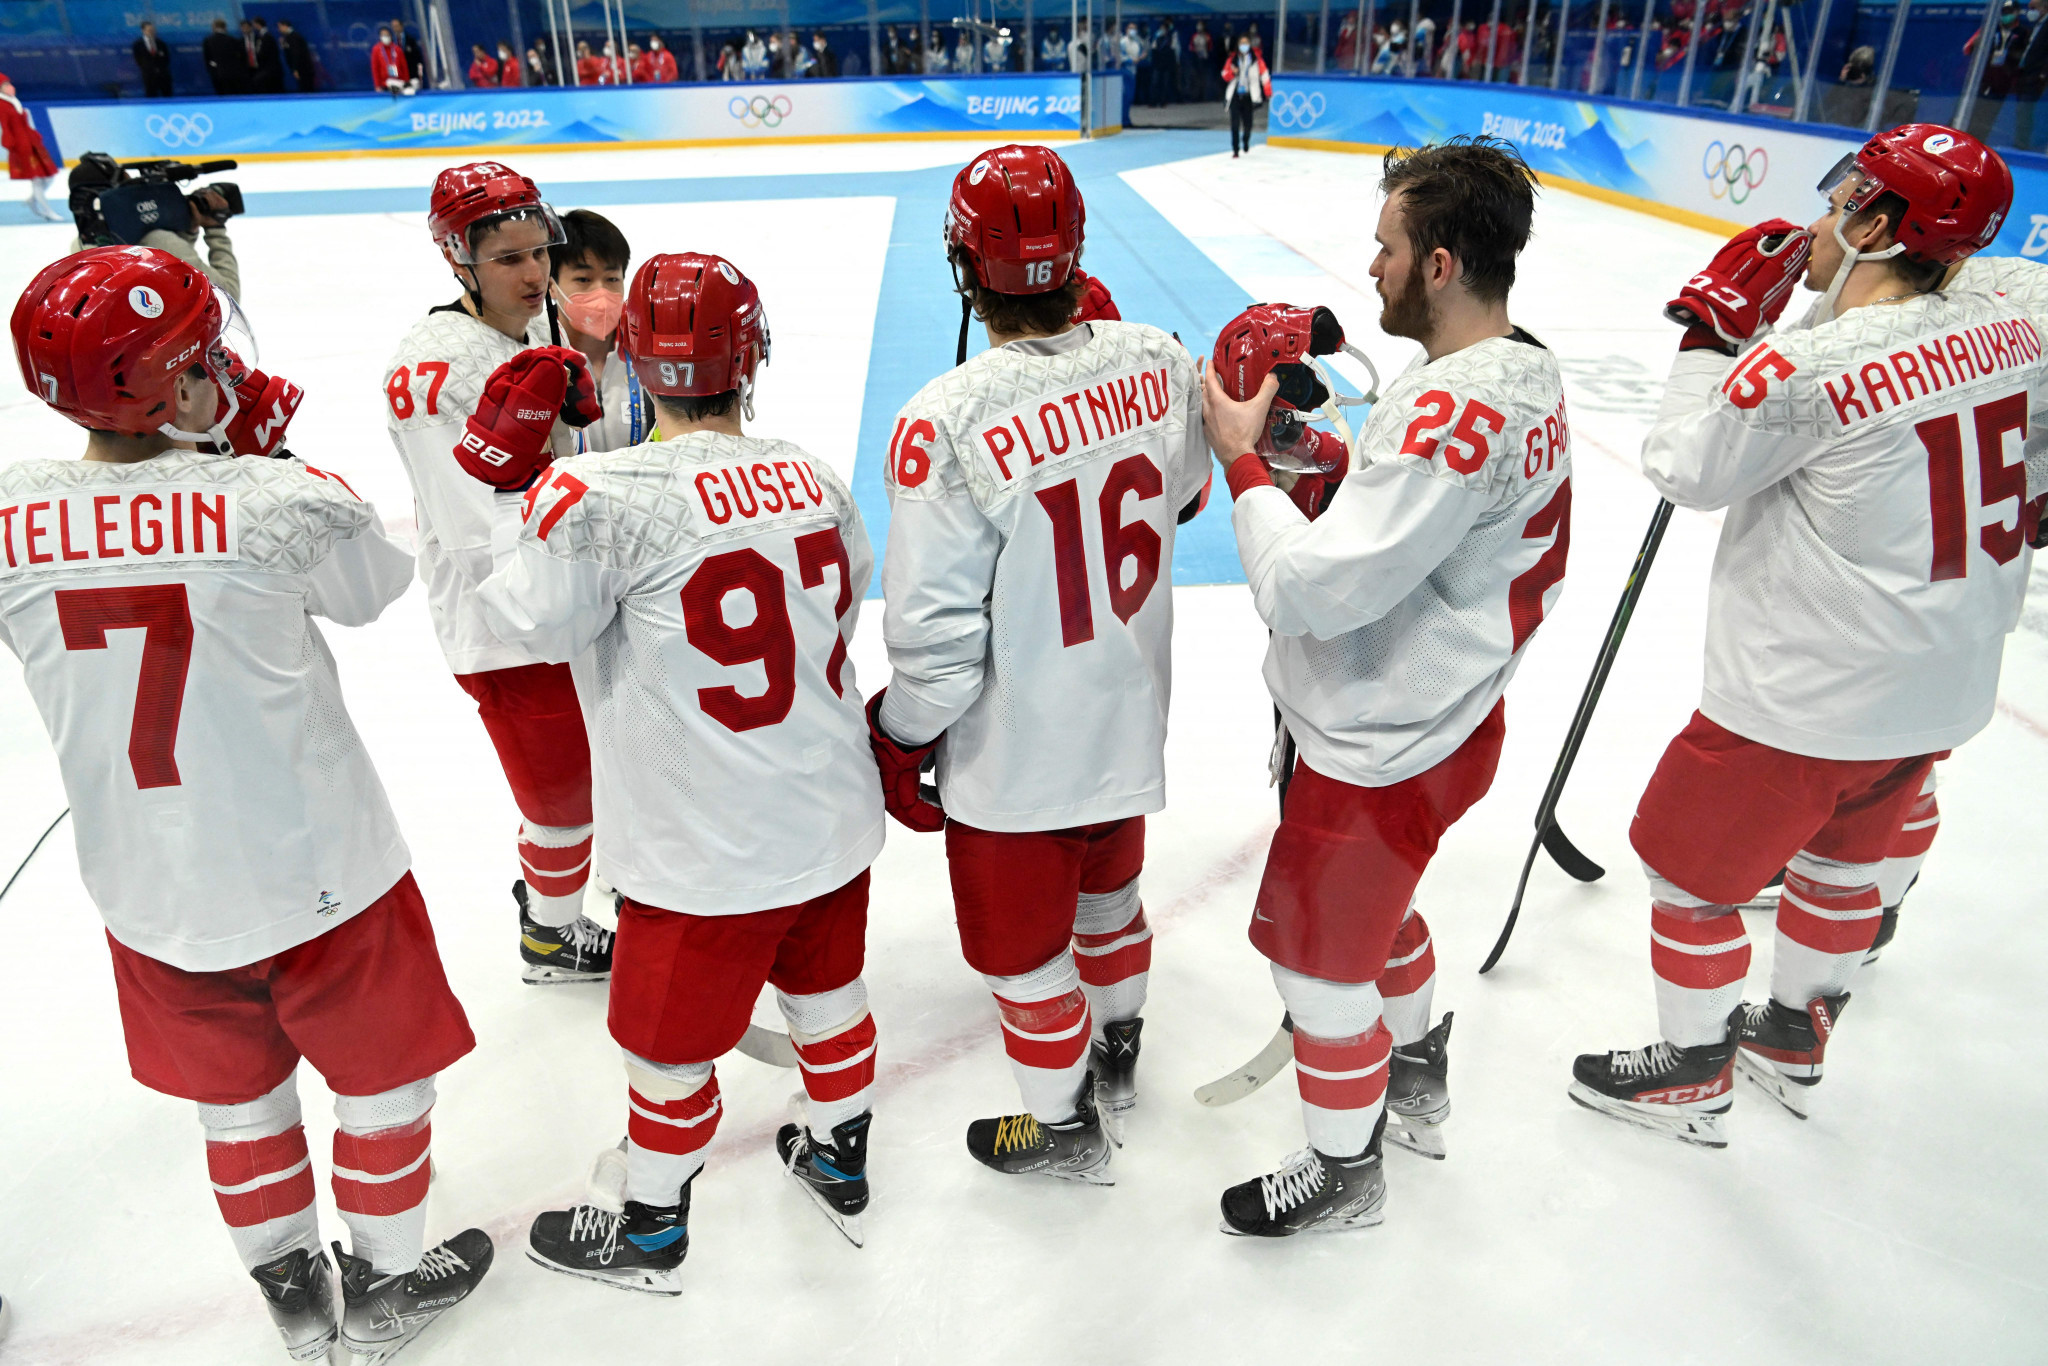 Russian ice hockey chiefs have said they will appeal against the decision to strip St Petersburg of the 2023 World Championships ©Getty Images